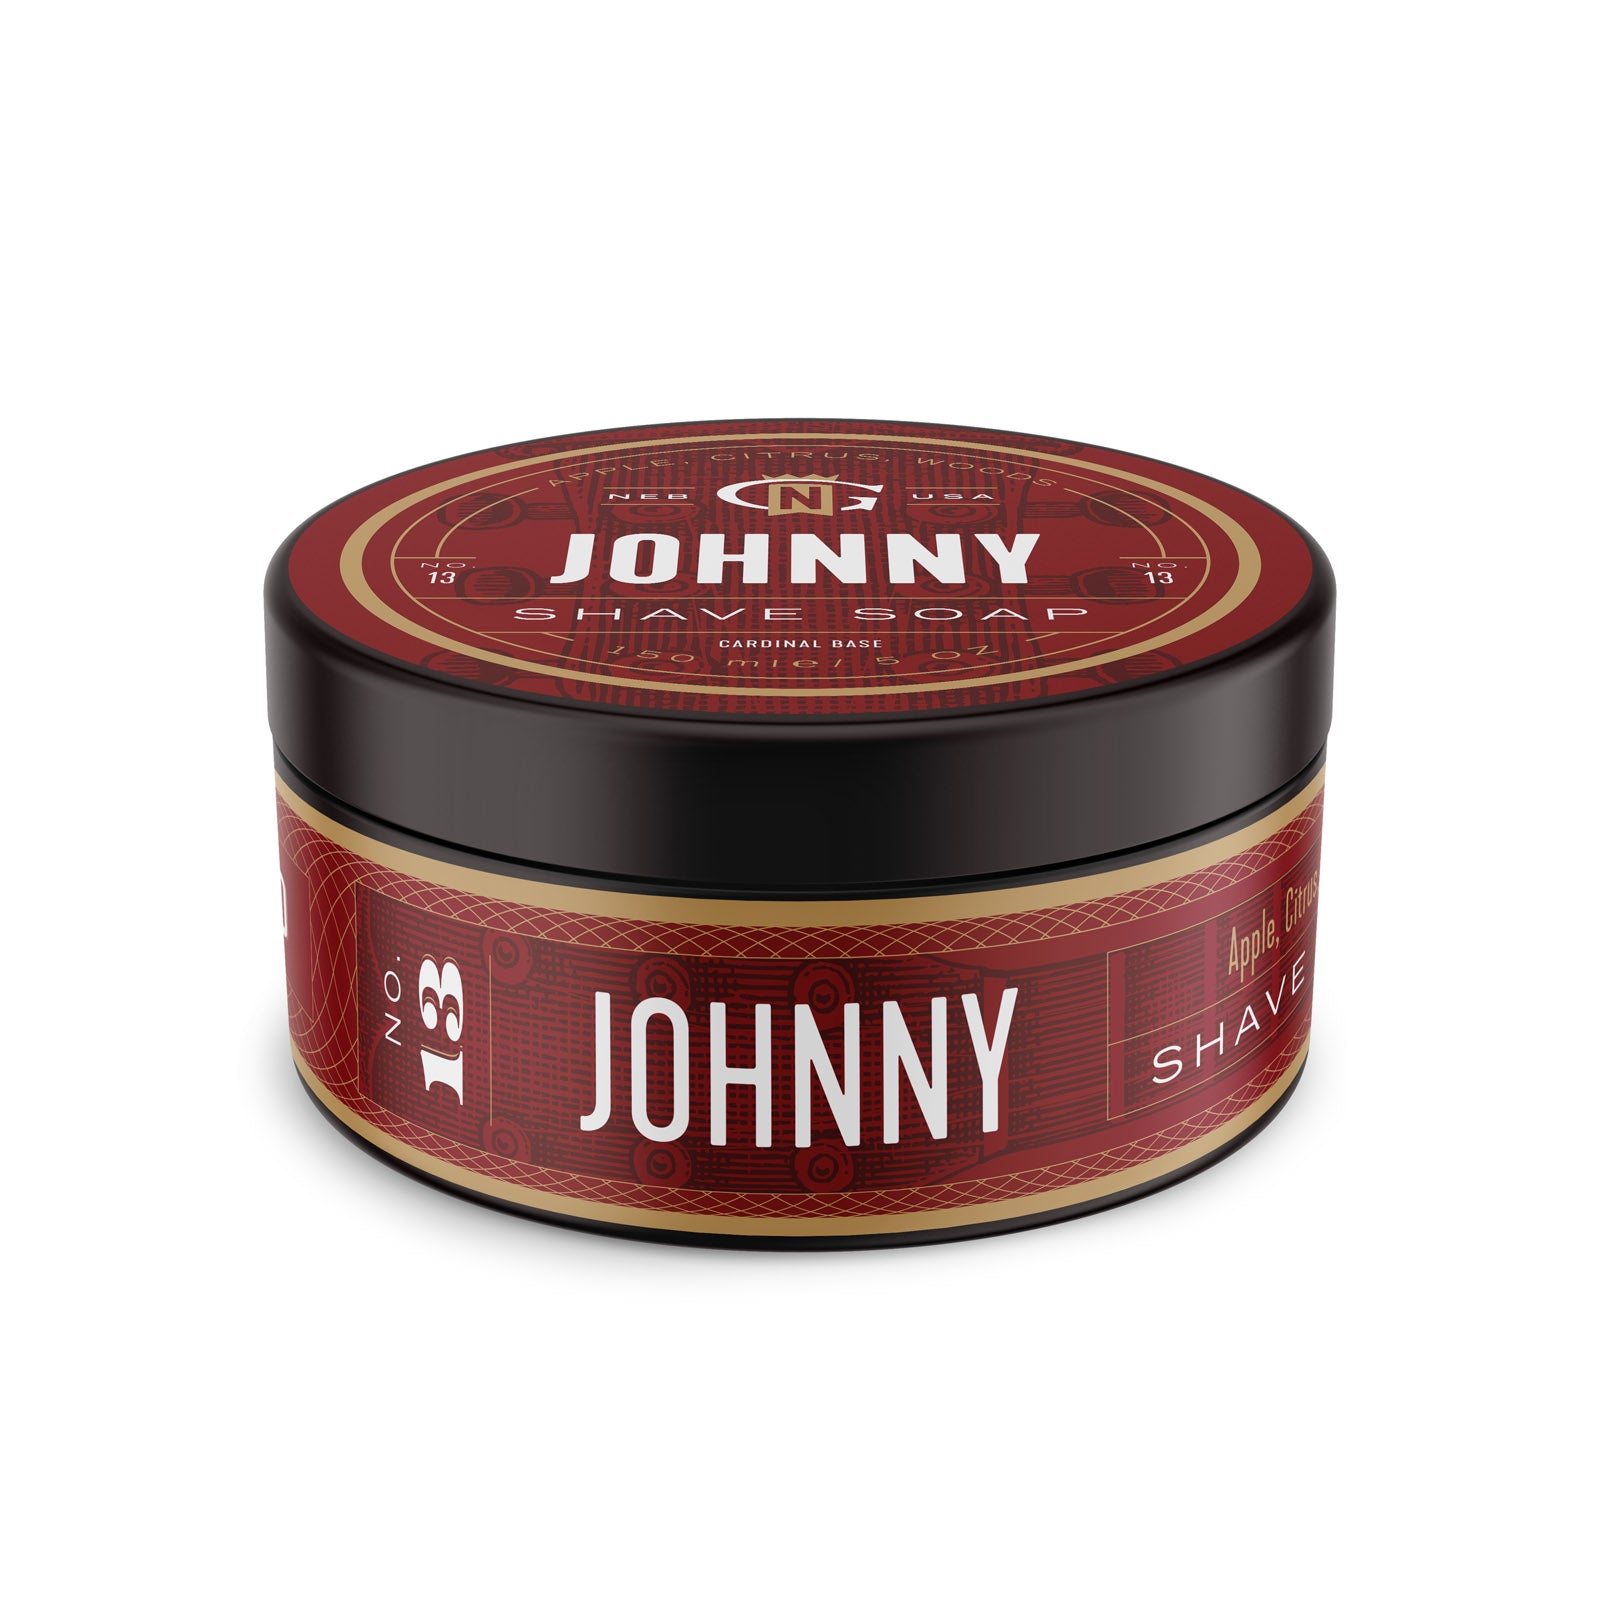 Johnny Shave Soap